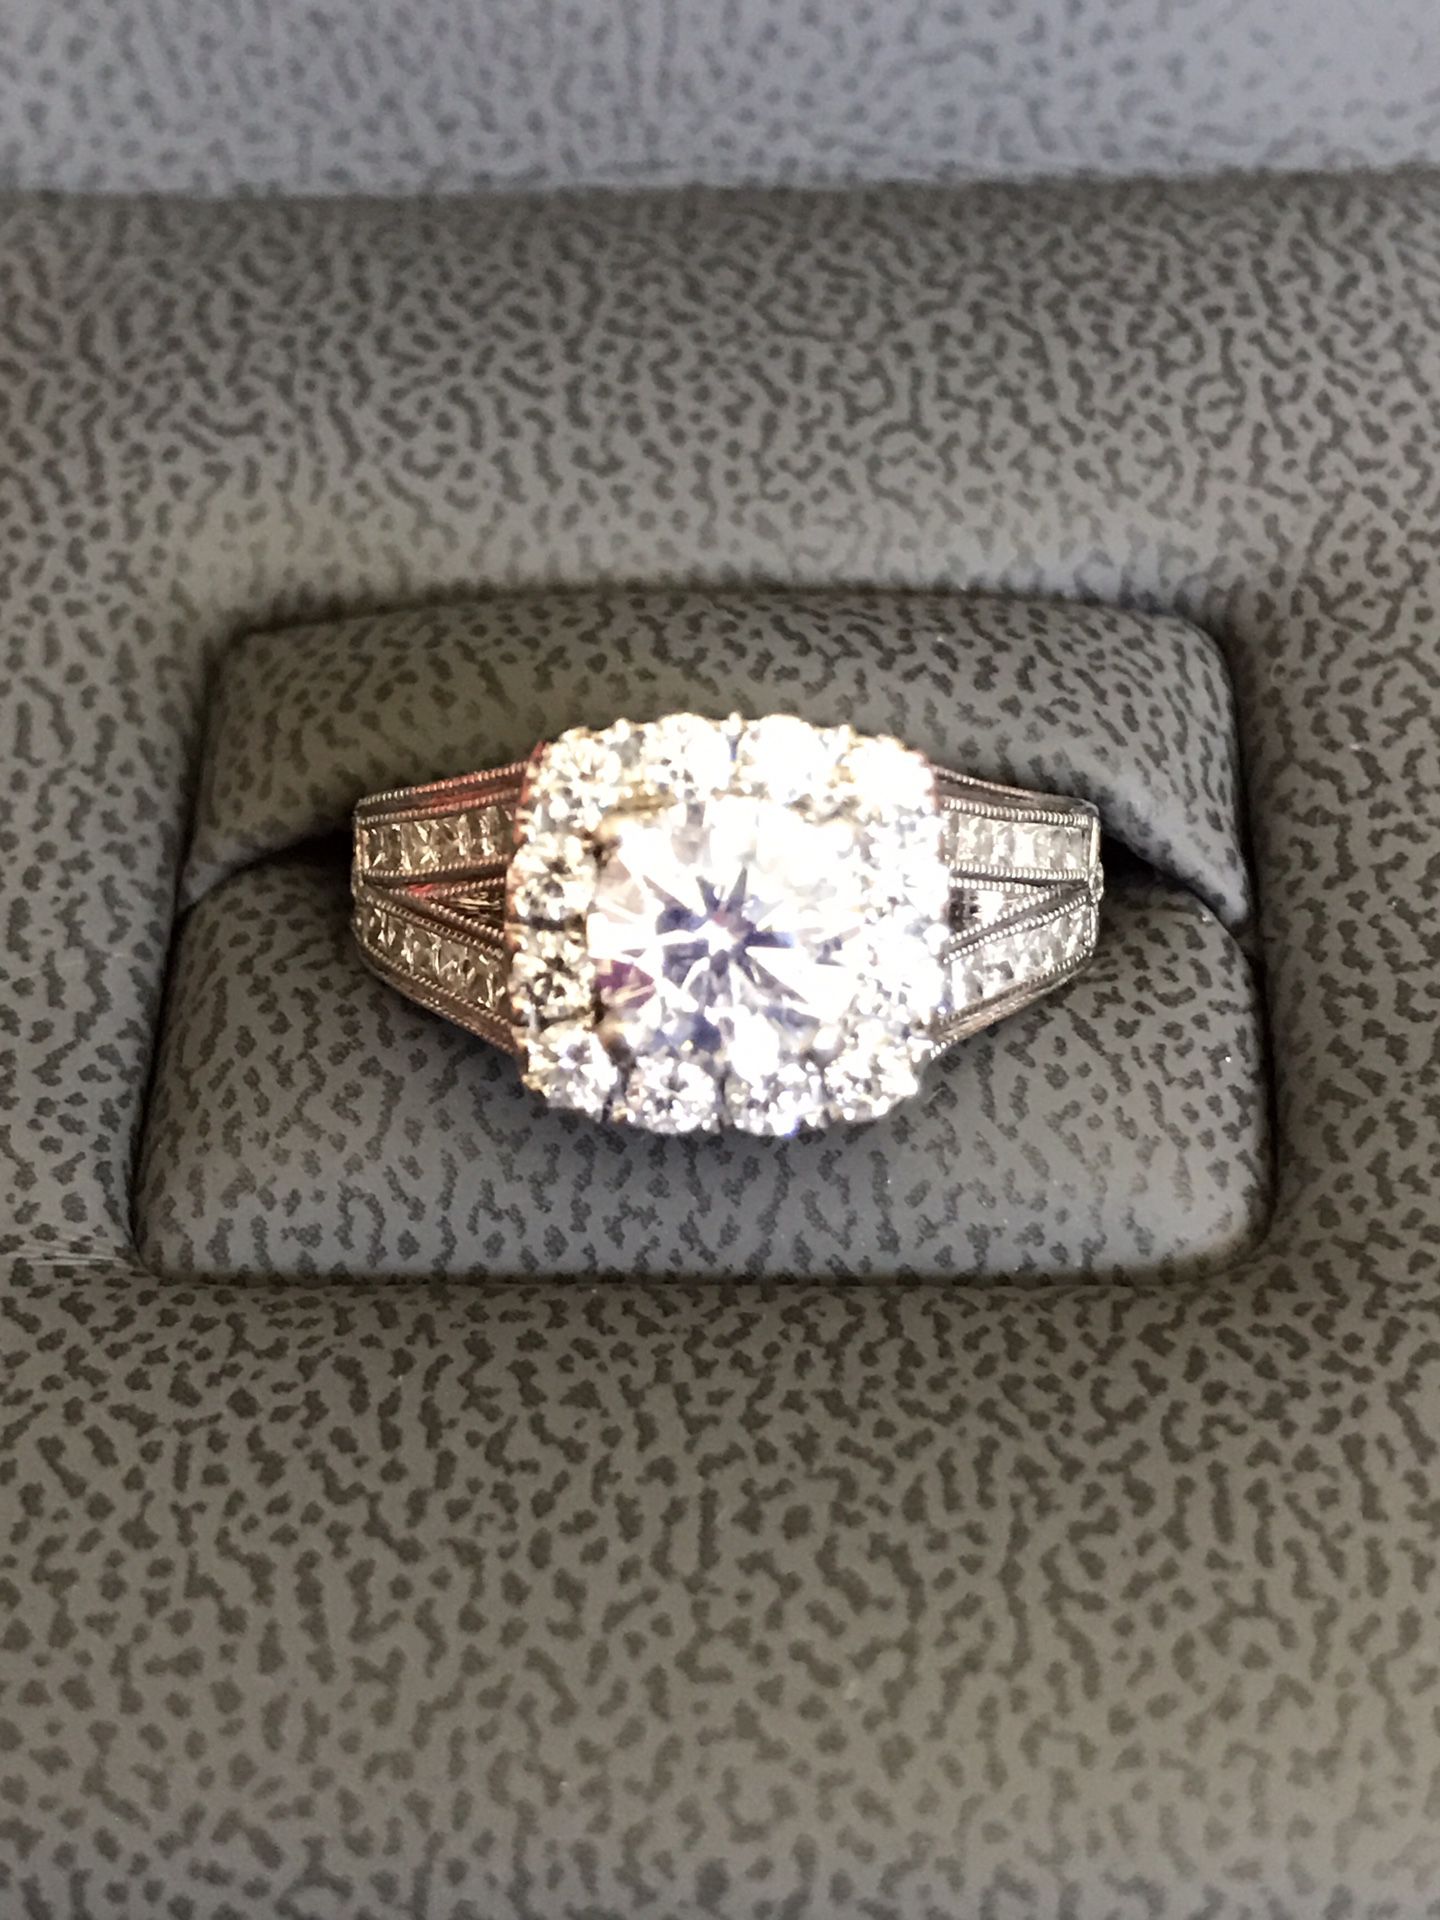 REDUCED 14K White Gold Engagement Ring Size 7